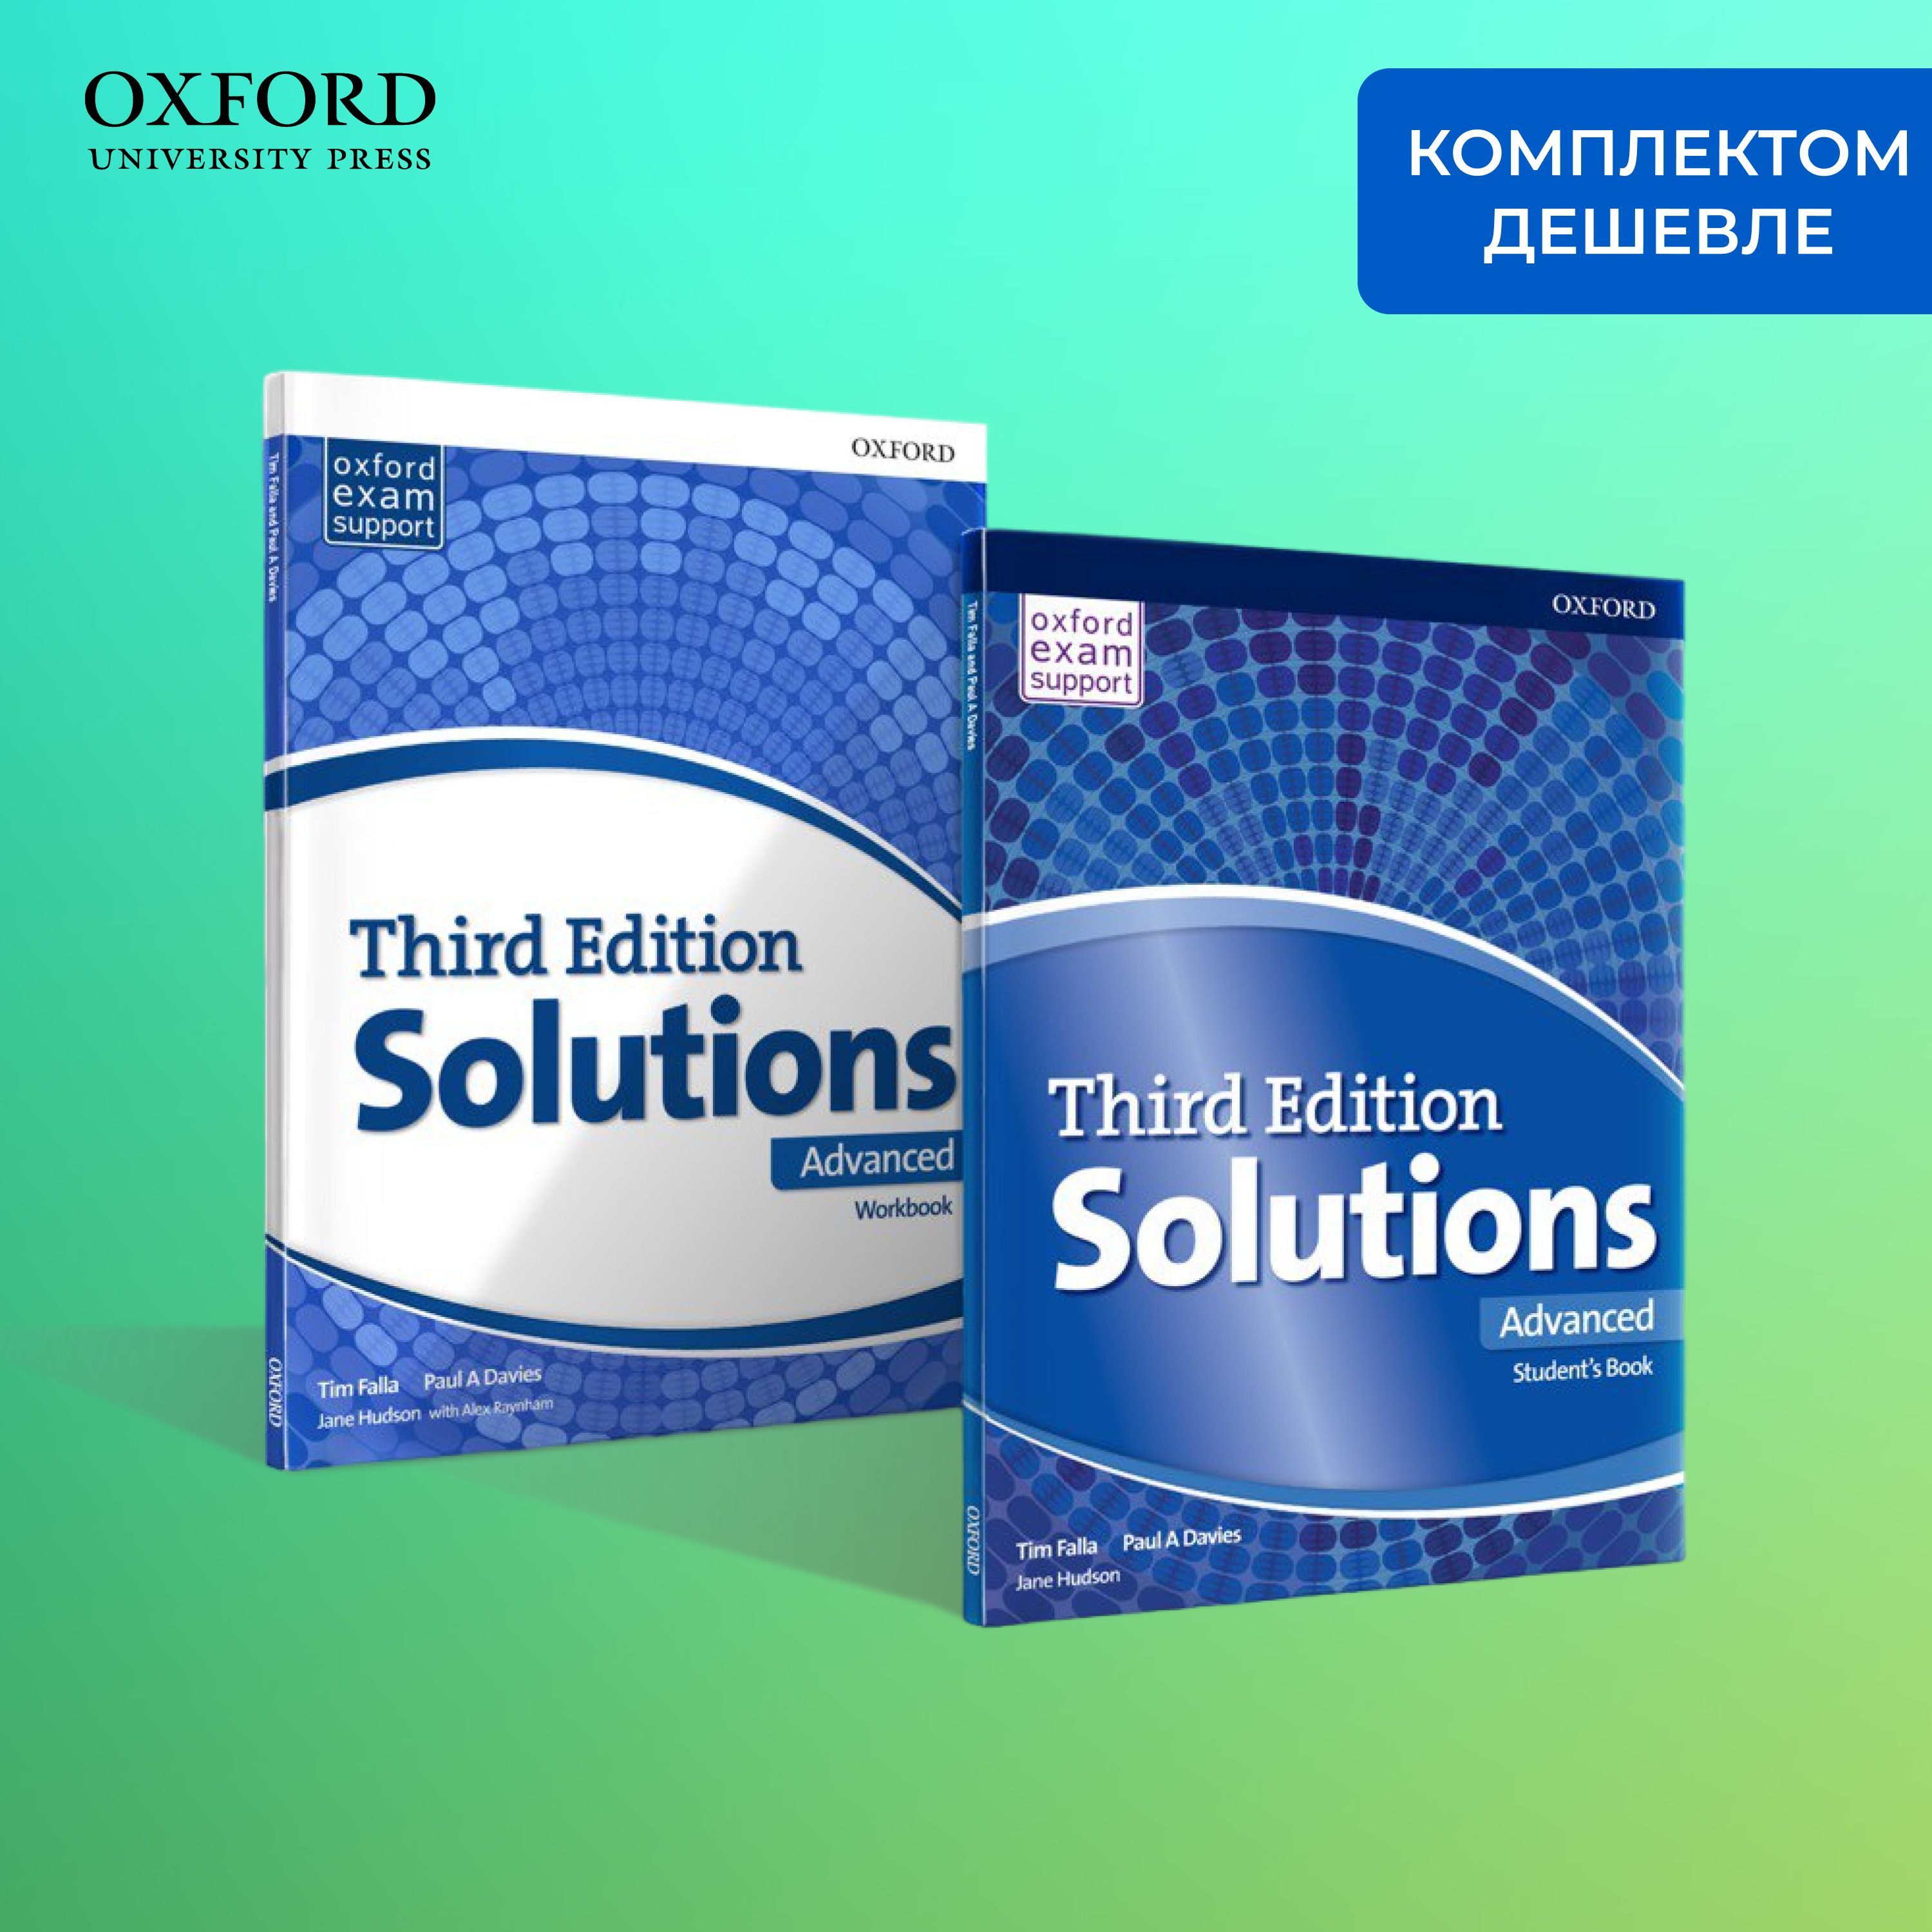 Solutions 3 edition tests. Solutions Intermediate 3rd Edition. Solution Intermediate 3 Edition Audio. Solutions: Advanced. Third Edition solutions.